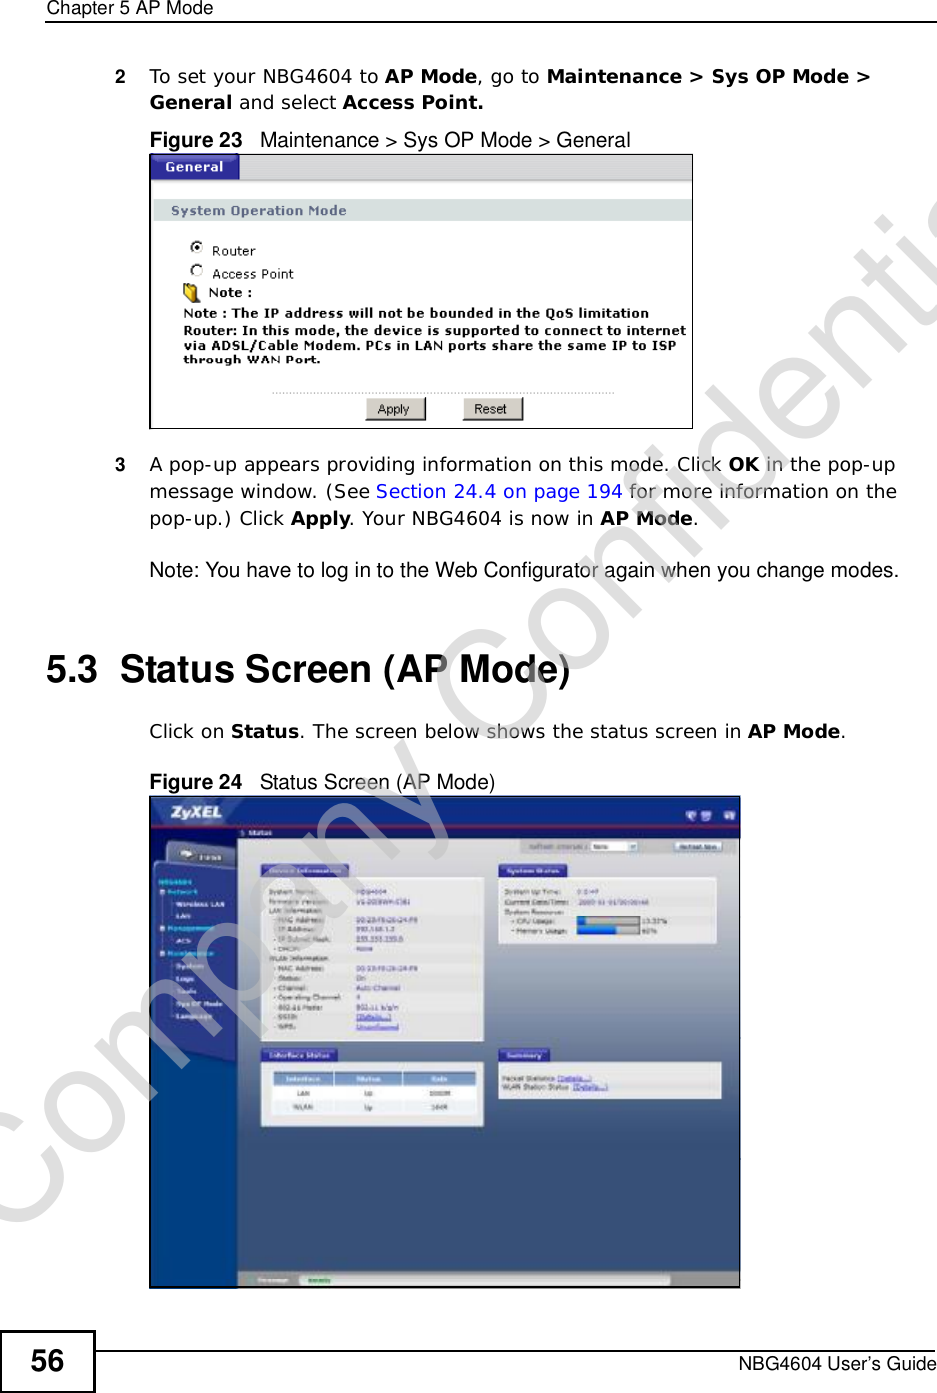 Chapter 5AP ModeNBG4604 User’s Guide562To set your NBG4604 to AP Mode, go to Maintenance &gt; Sys OP Mode &gt; General and select Access Point.Figure 23   Maintenance &gt; Sys OP Mode &gt; General3A pop-up appears providing information on this mode. Click OK in the pop-up message window. (See Section 24.4 on page 194 for more information on the pop-up.) Click Apply. Your NBG4604 is now in AP Mode.Note: You have to log in to the Web Configurator again when you change modes.5.3  Status Screen (AP Mode)Click on Status. The screen below shows the status screen in AP Mode.Figure 24   Status Screen (AP Mode) Company Confidential